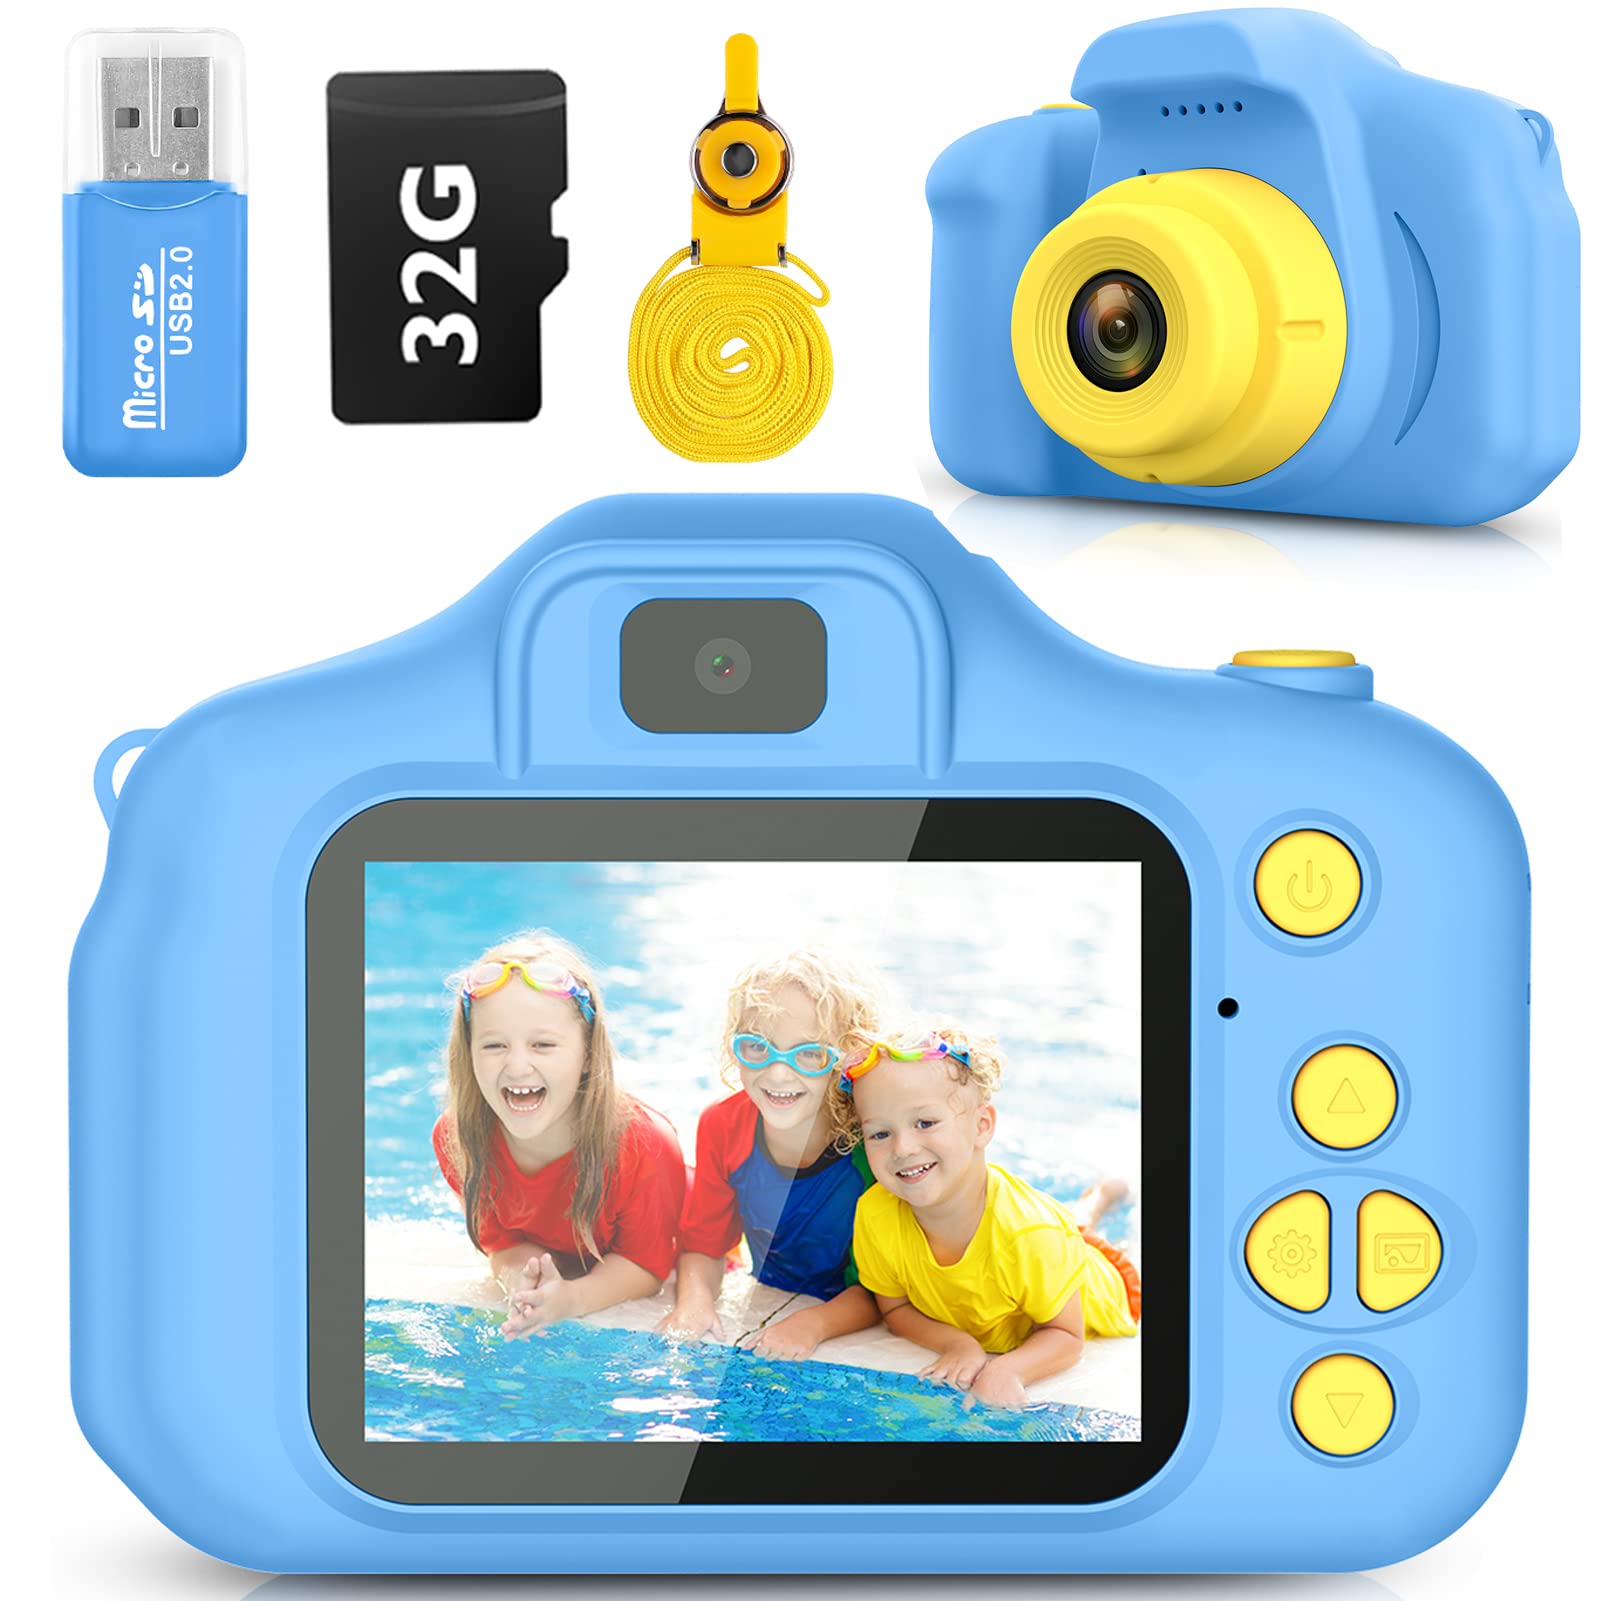 Desuccus Kids Camera Toddler Toys Christmas Birthday Gifts for Boys and Girls Kids Toys 3-9 Year Old HD Video Digital Video Camera for Toddler 5 Puzzle Games with 32GB SD Card (Blue)